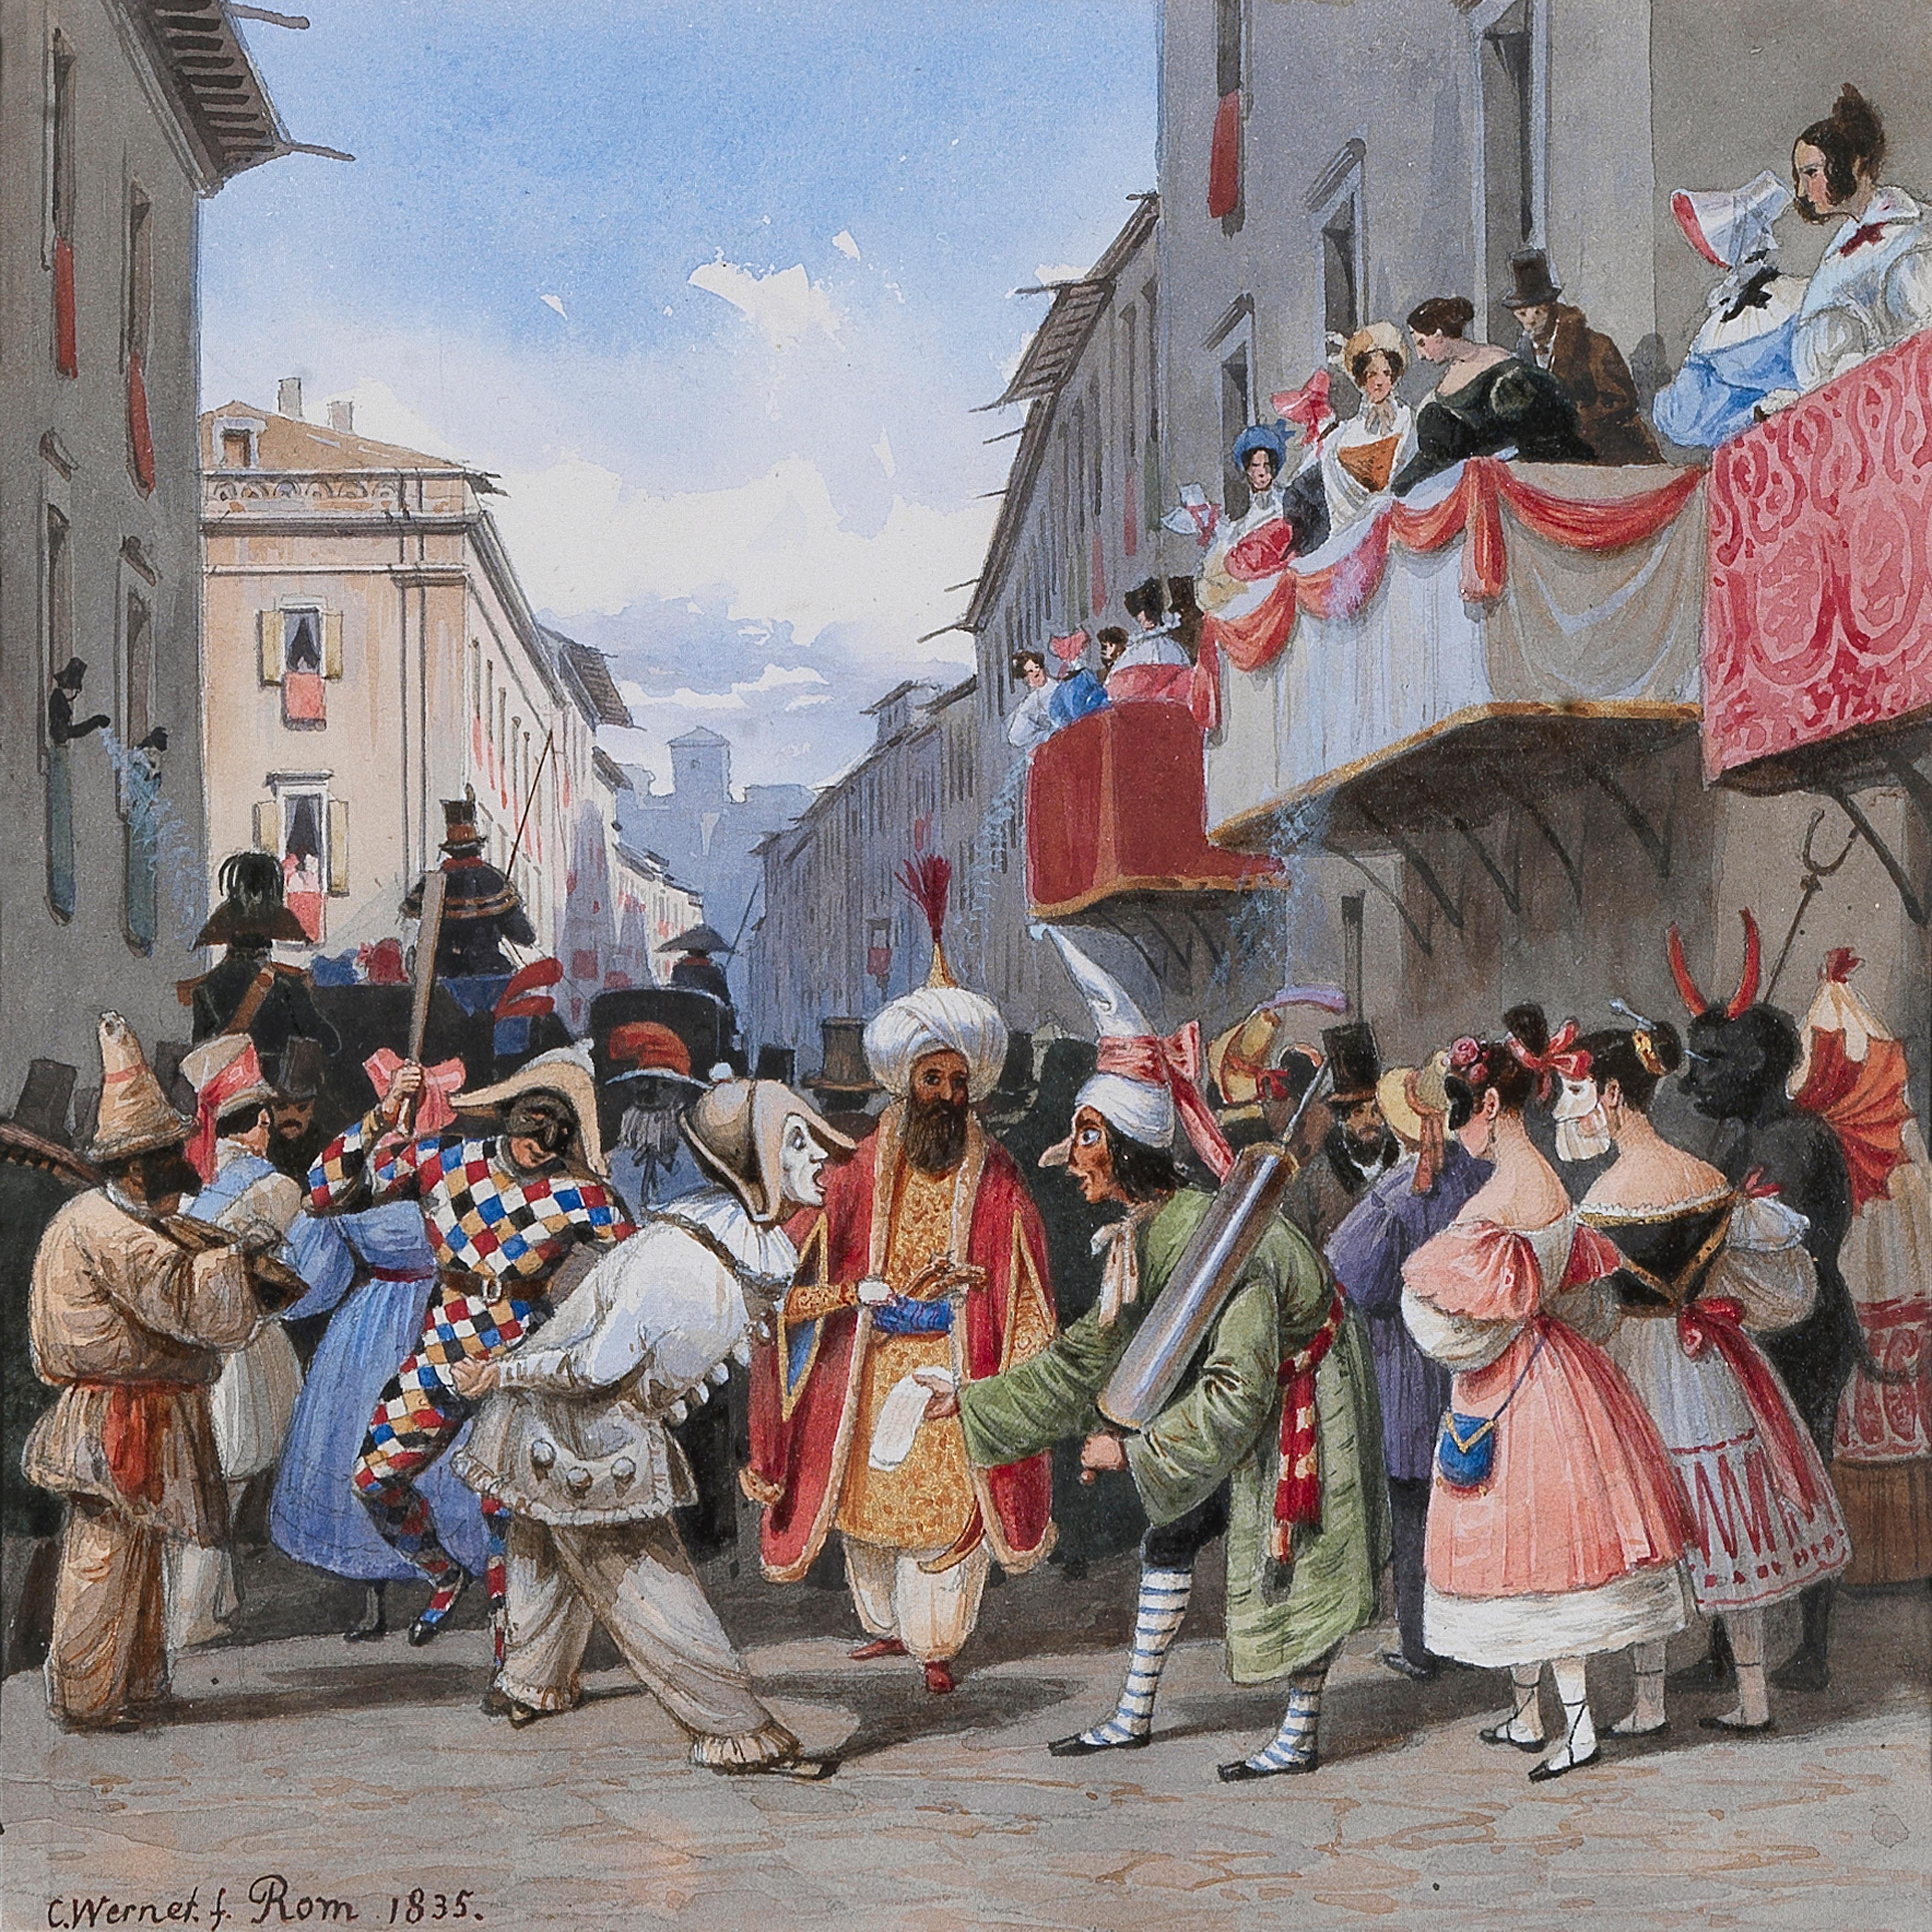 Carnival in Rome. Spectacular Roman costume and masked festivity  - Art by Carl Friedrich Heinrich Werner